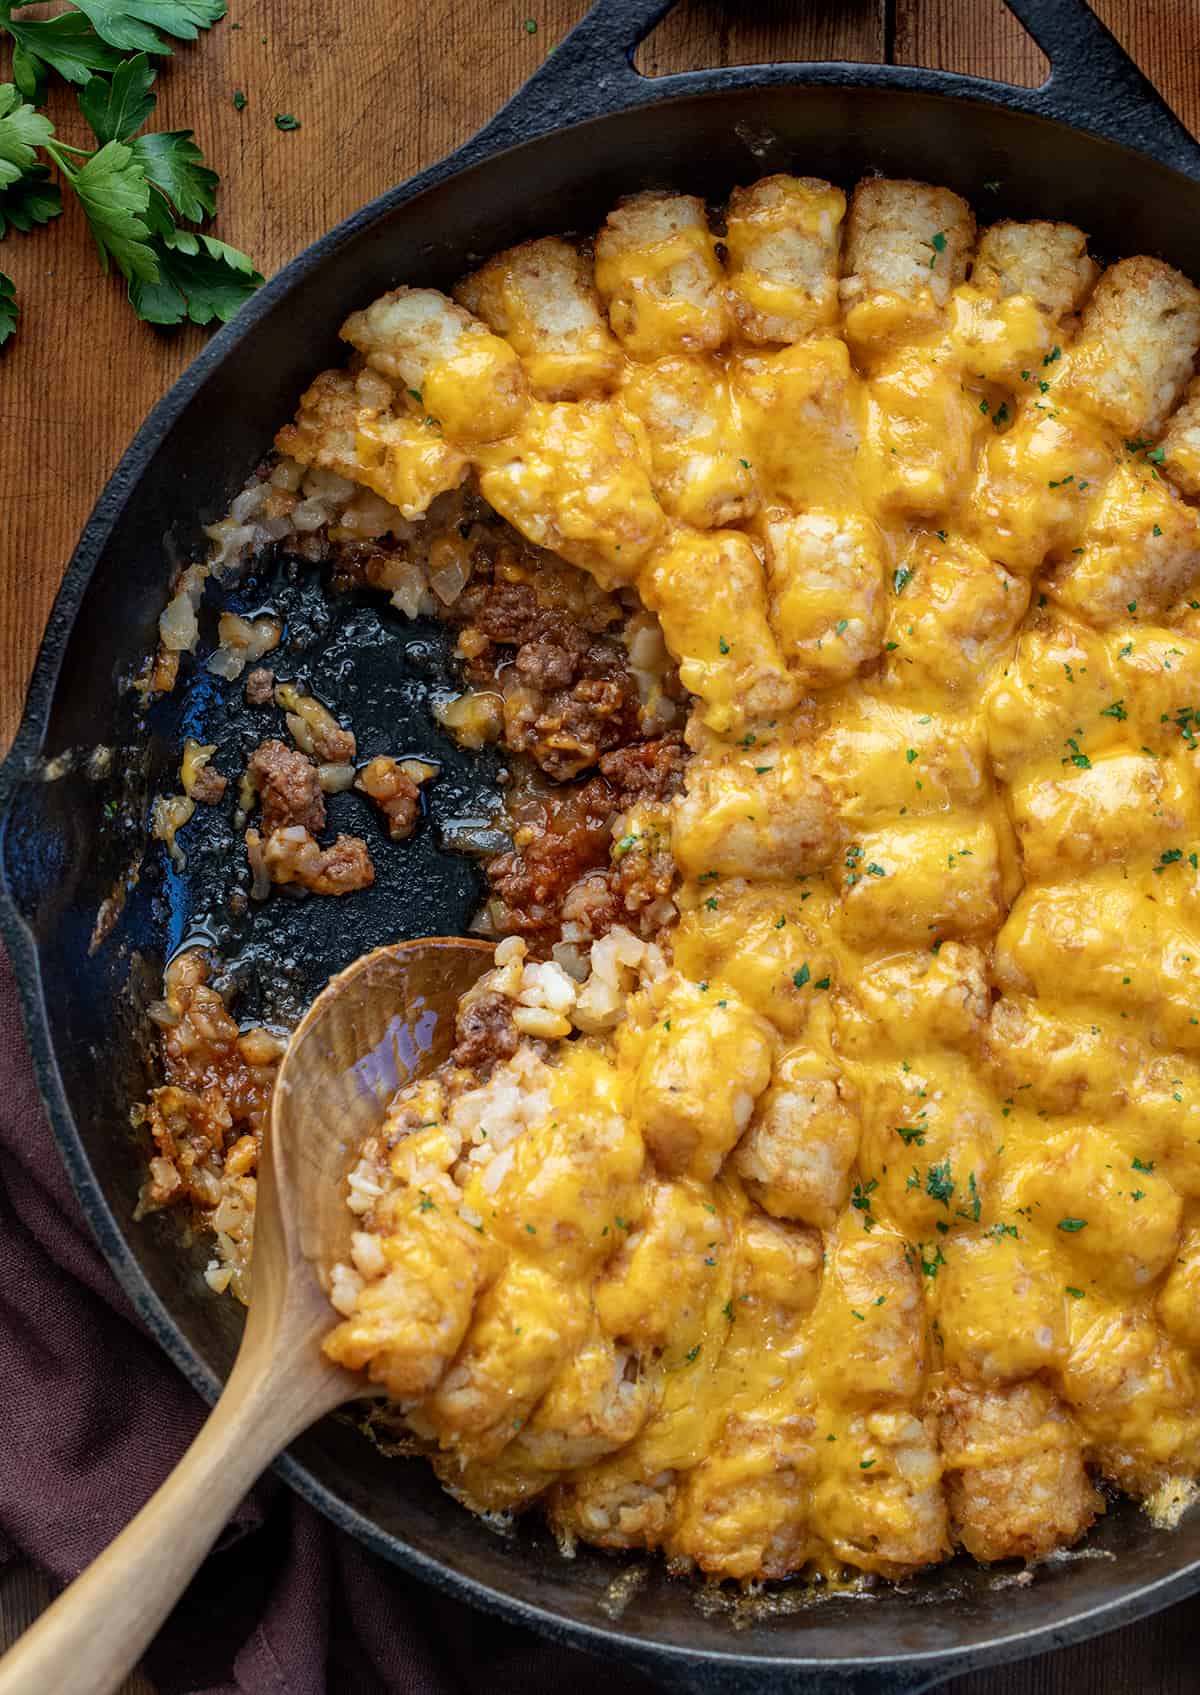 Sloppy Joe Tater Tot Casserole in a skillet with some removed so the sloppy joe is showing.